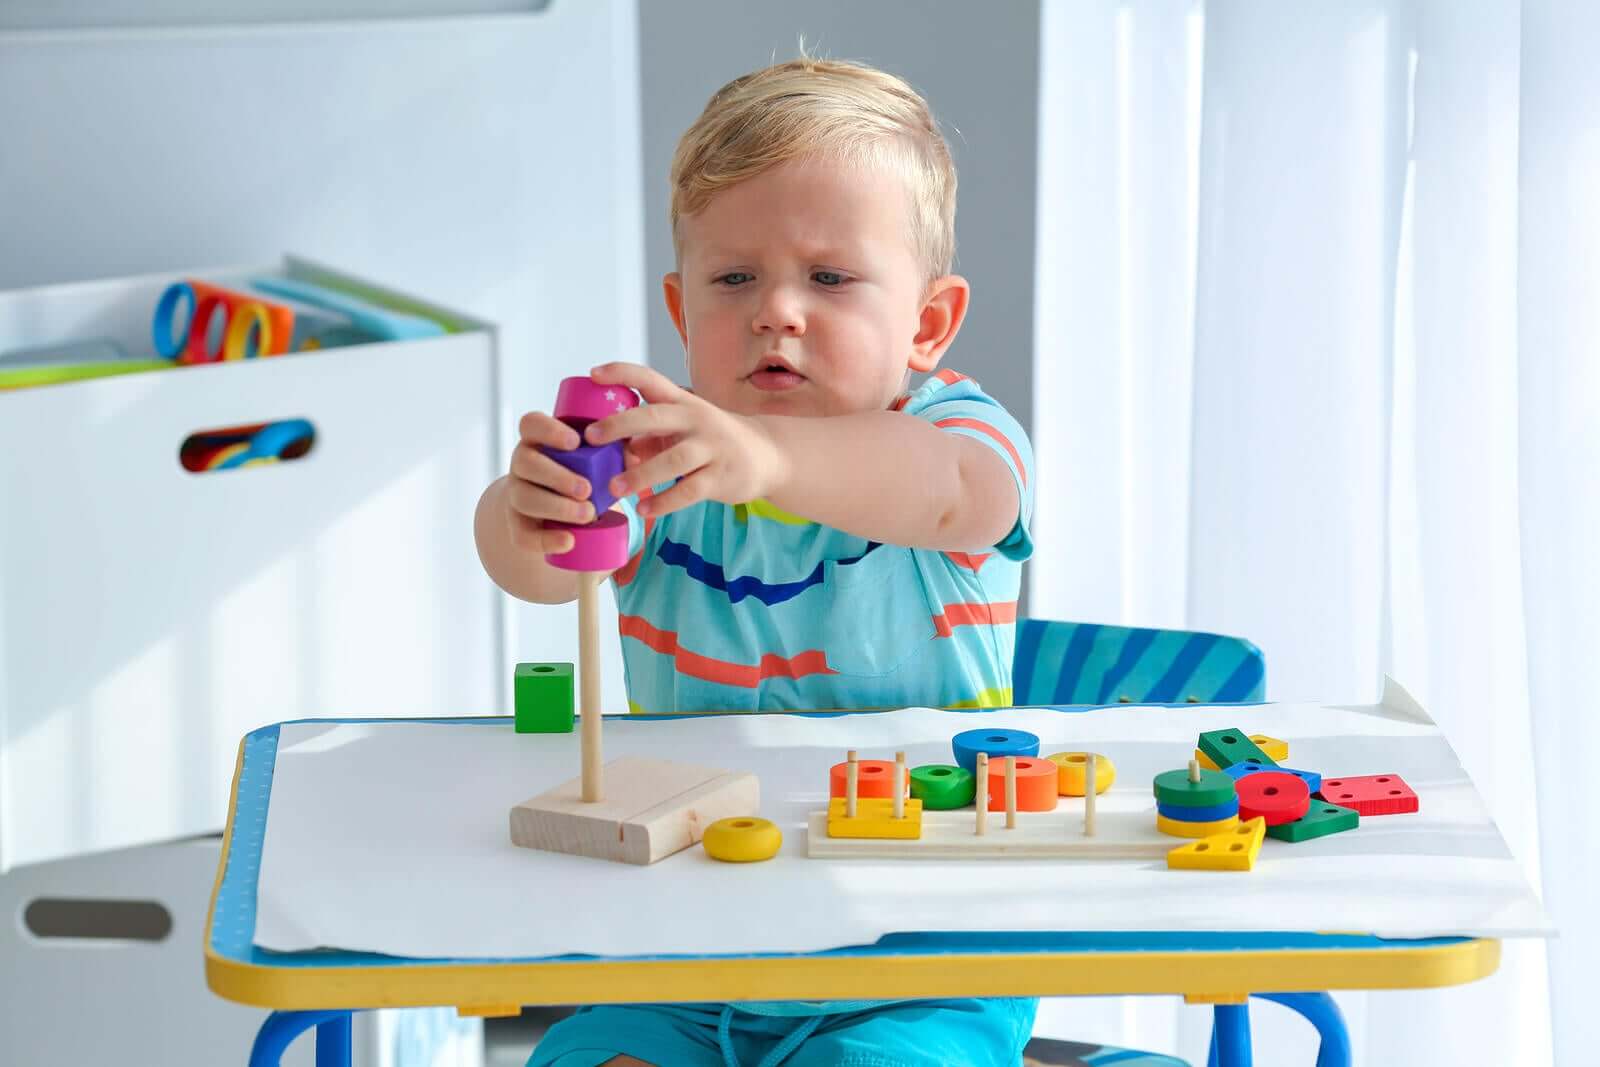 A toddler playing with wooden toys.